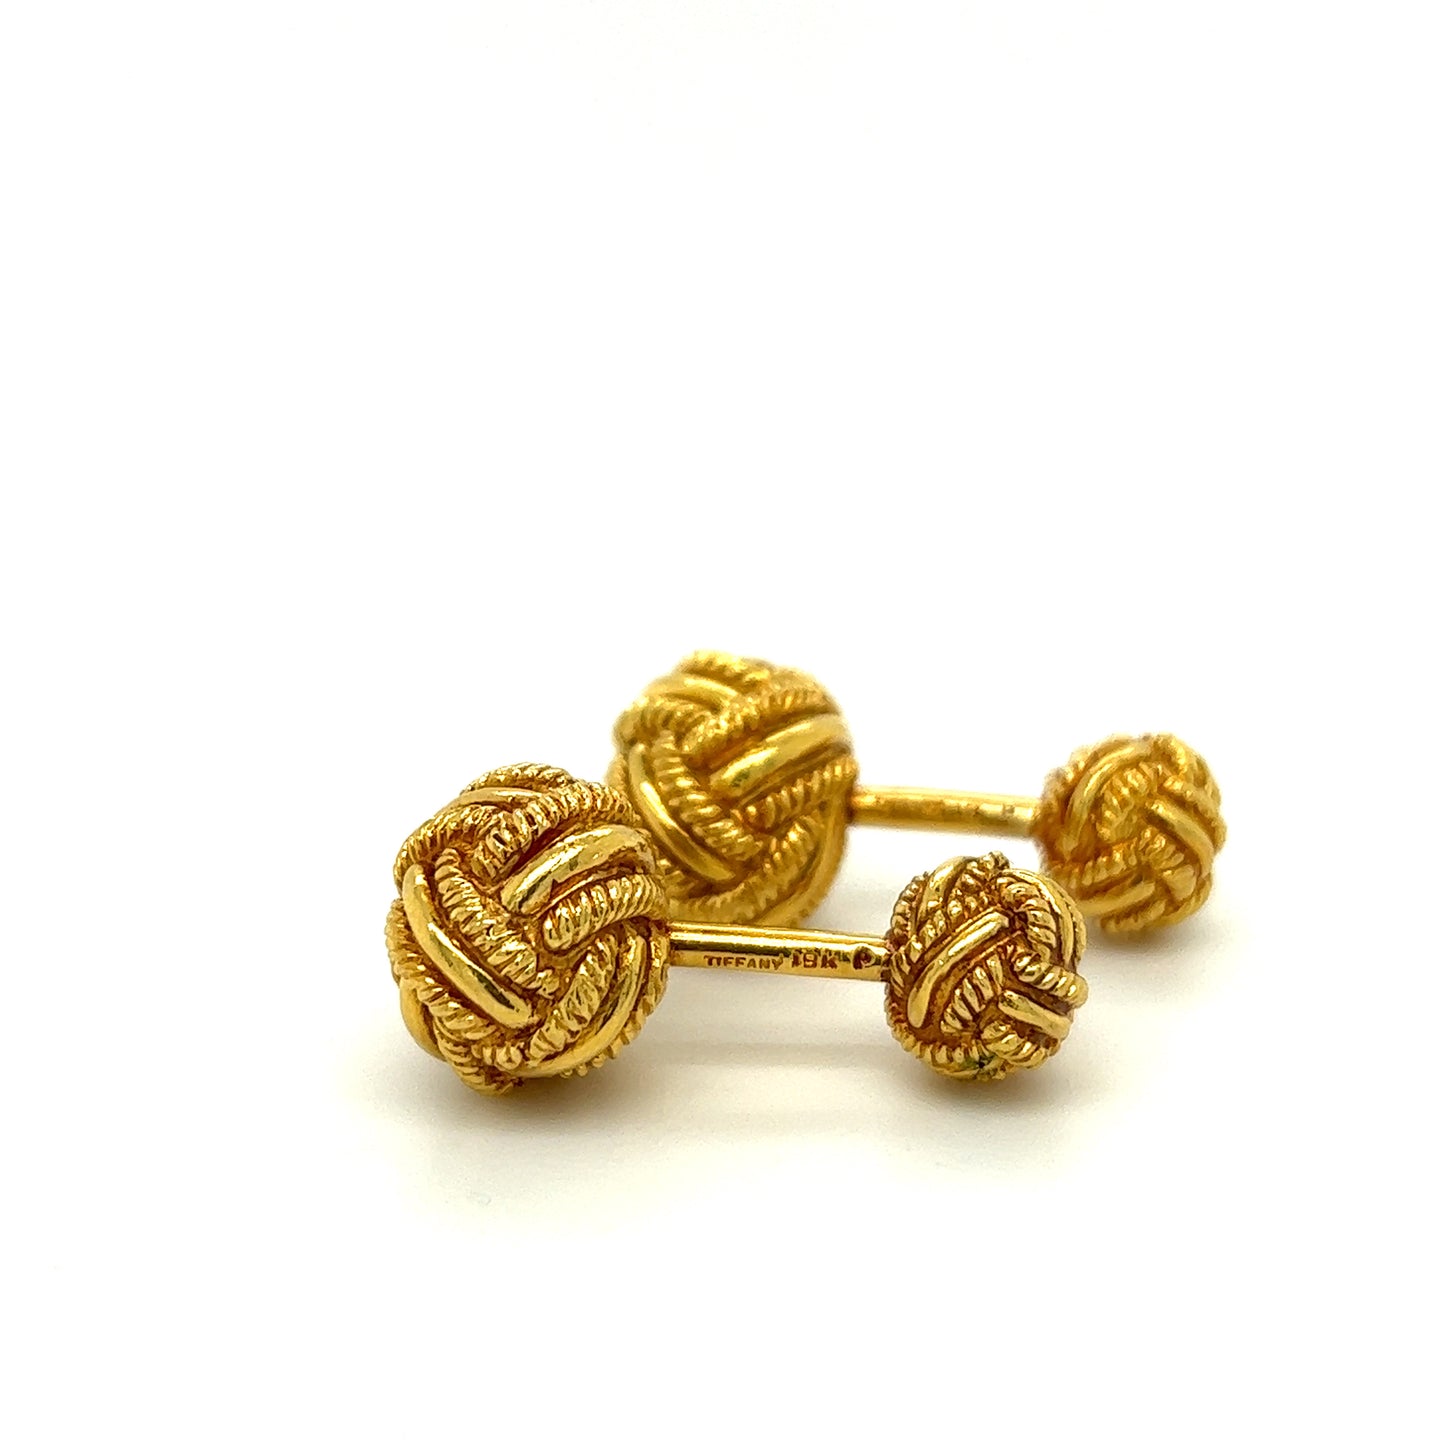 Tiffany & Co Schlumberger Woven Knot Cufflinks in 18k Yellow Gold